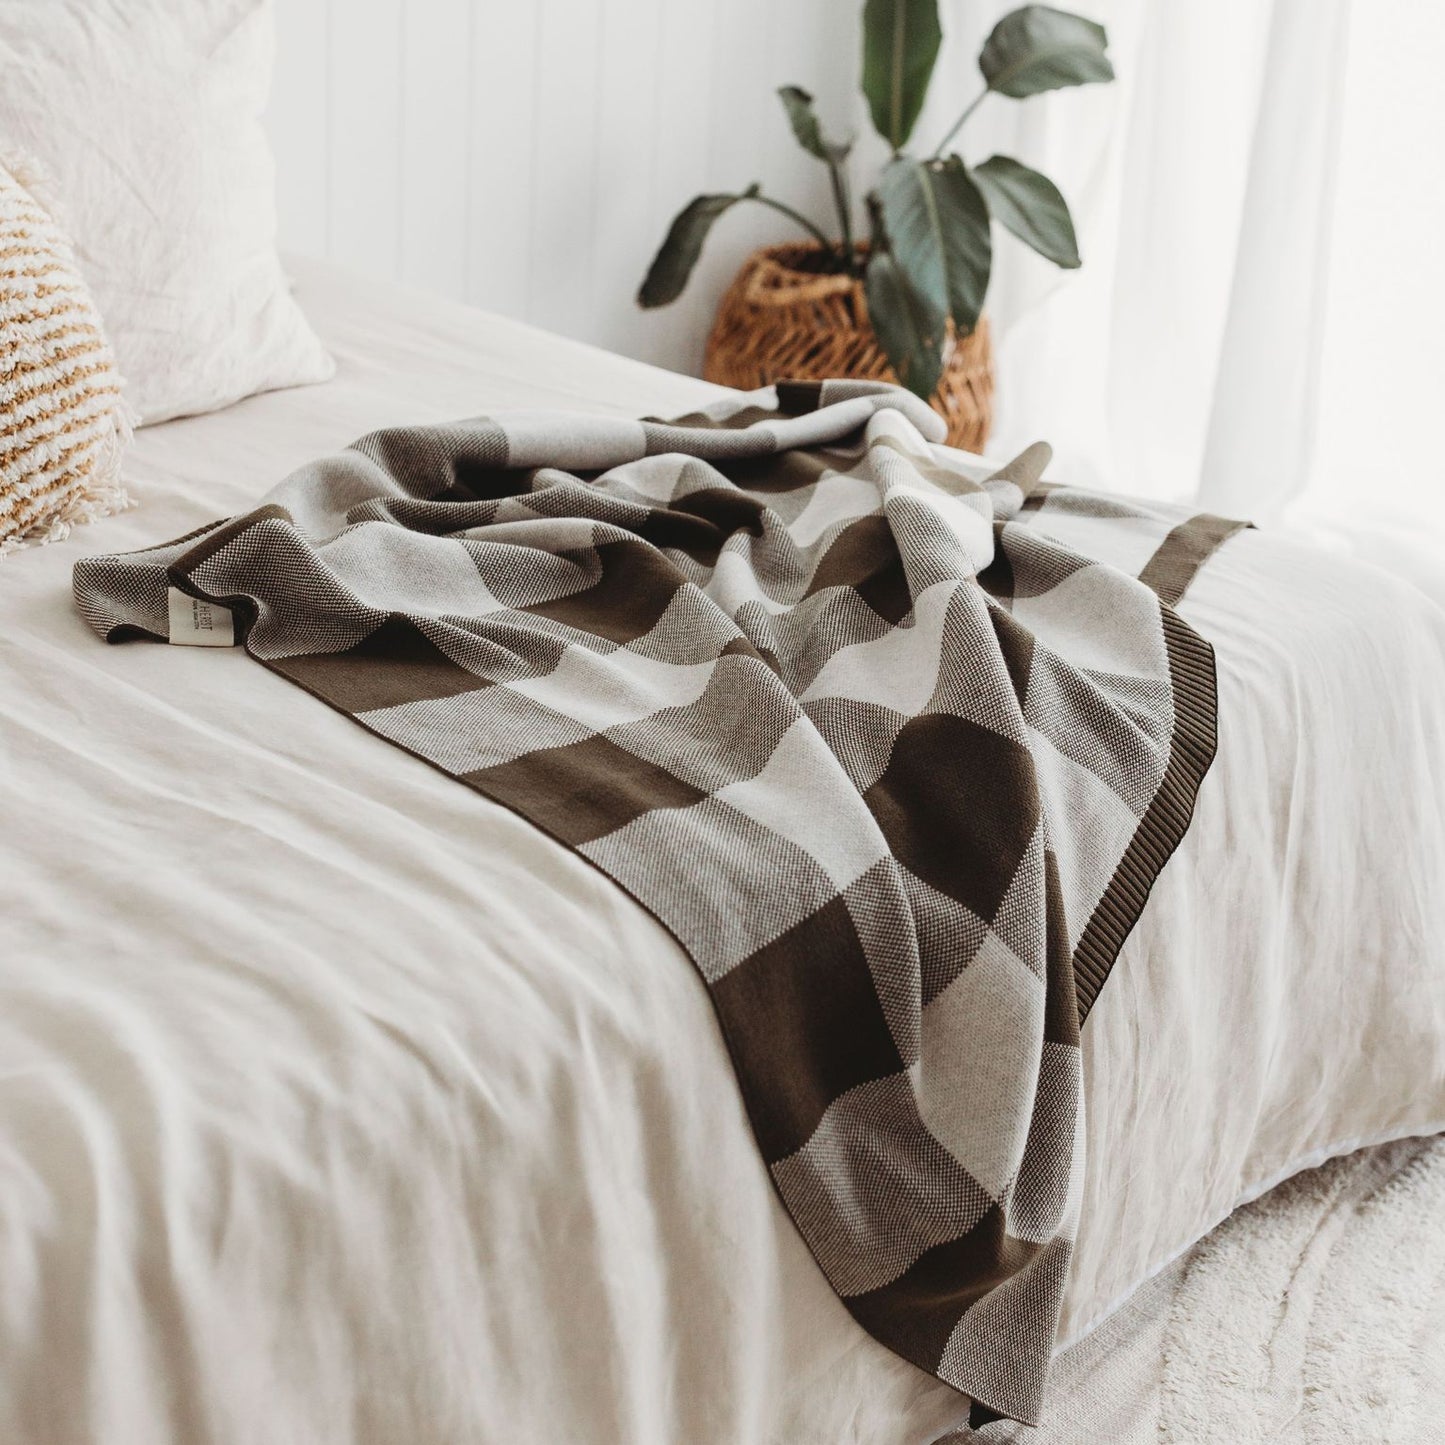 The Rest - organic Cotton Knit Blanket - Olive Gingham